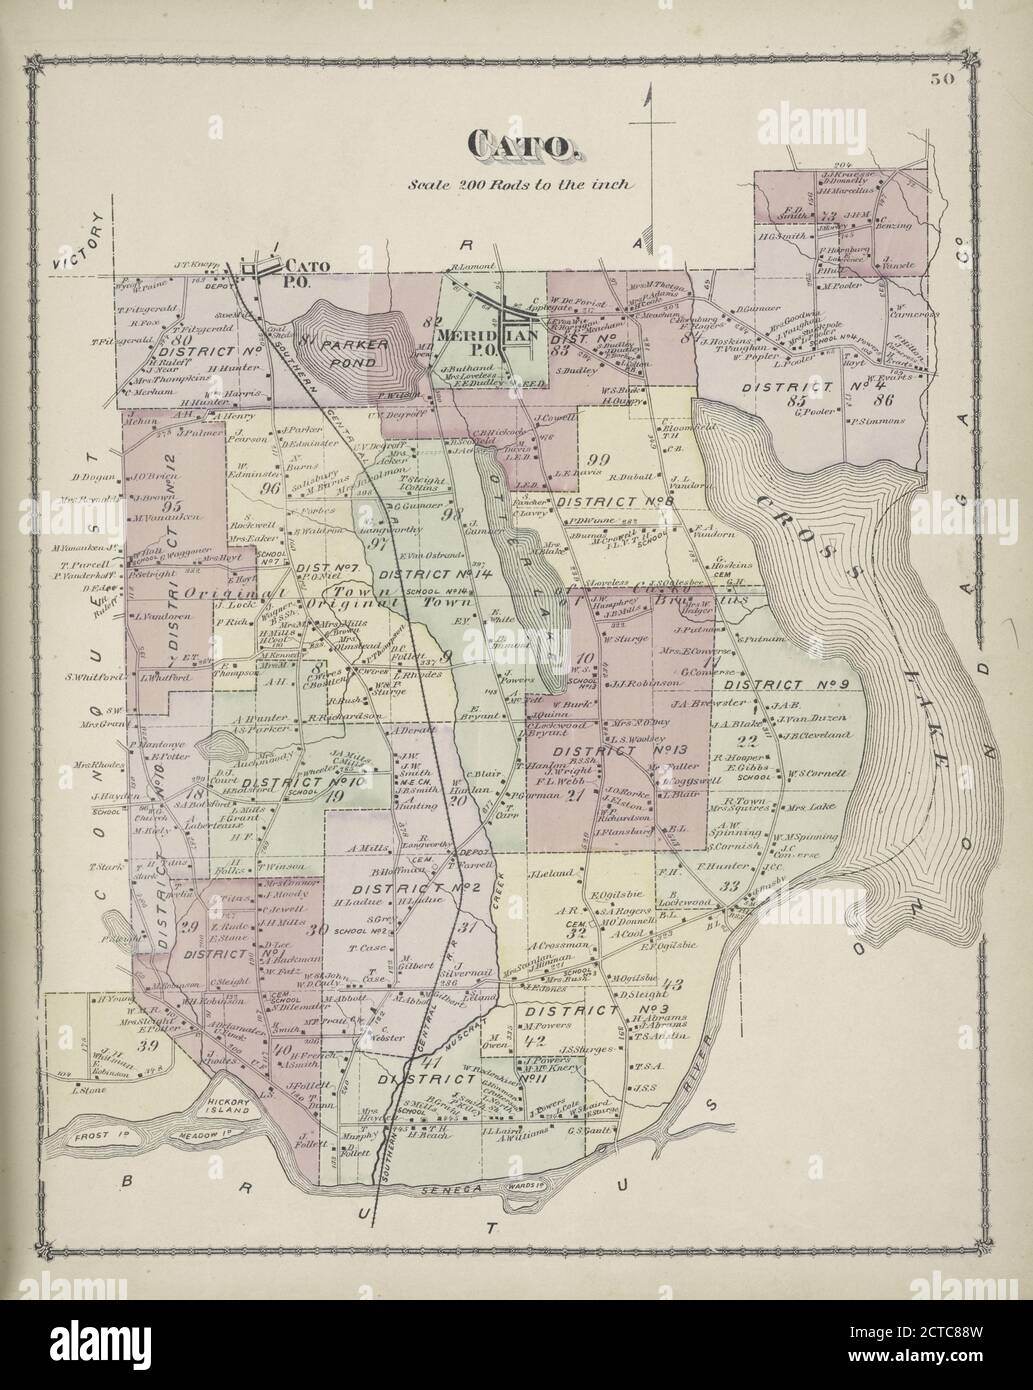 Cato. Township, cartografia, Atlases, 1875, Beers, F. W. (Frederick W.), J.B. Beers & Co Foto Stock